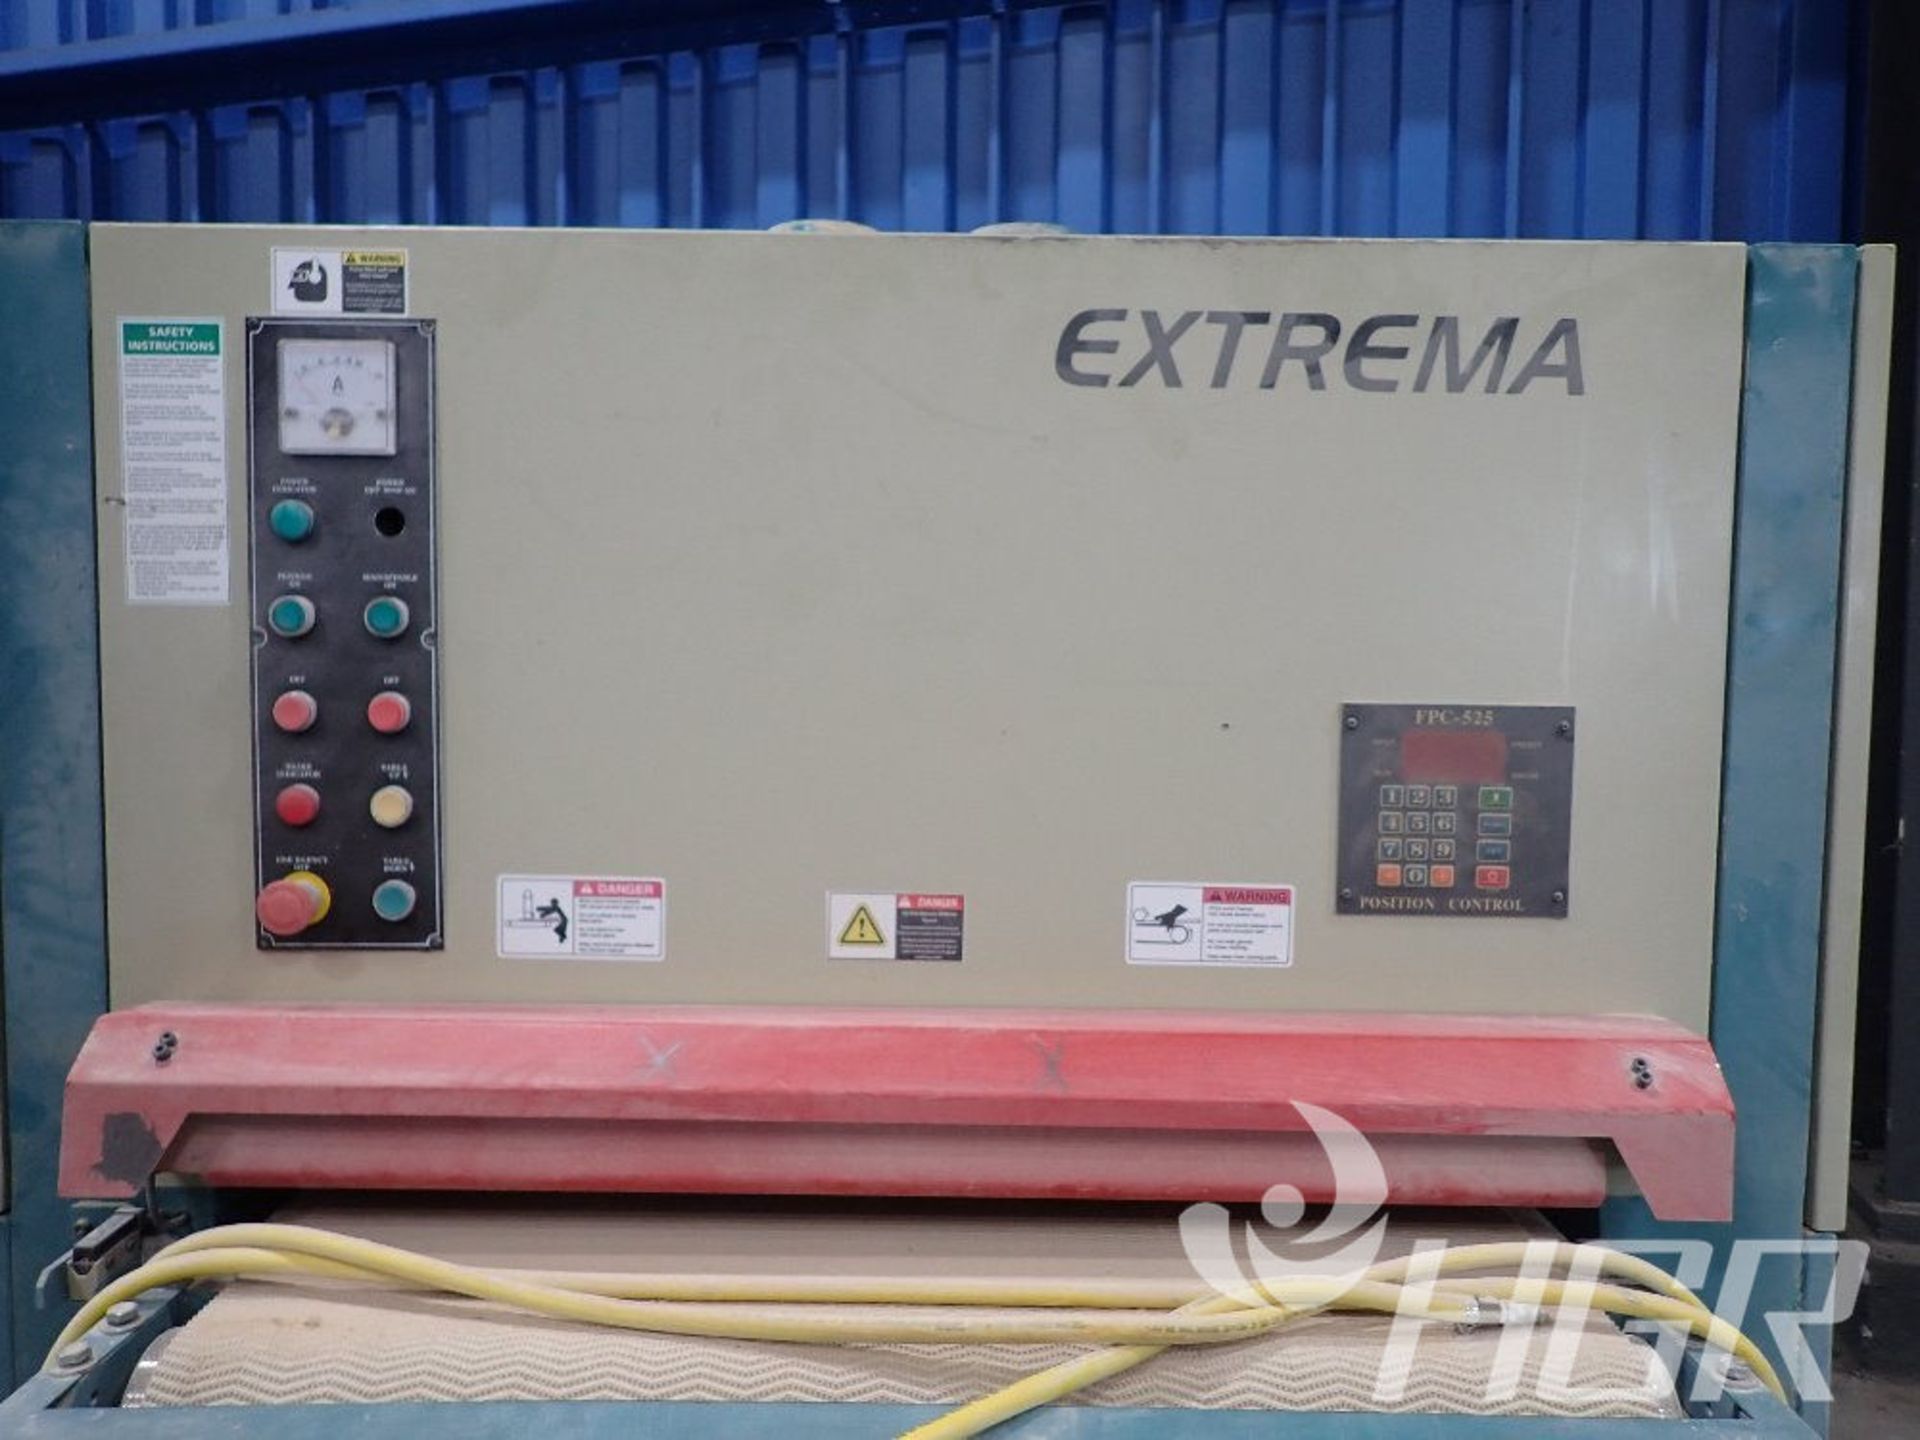 EXTREMA SANDER, Model XS-1A37/2, Date: 2008; s/n 2300804176, Approx. Capacity: 42X36, Power: n/a, - Image 4 of 13